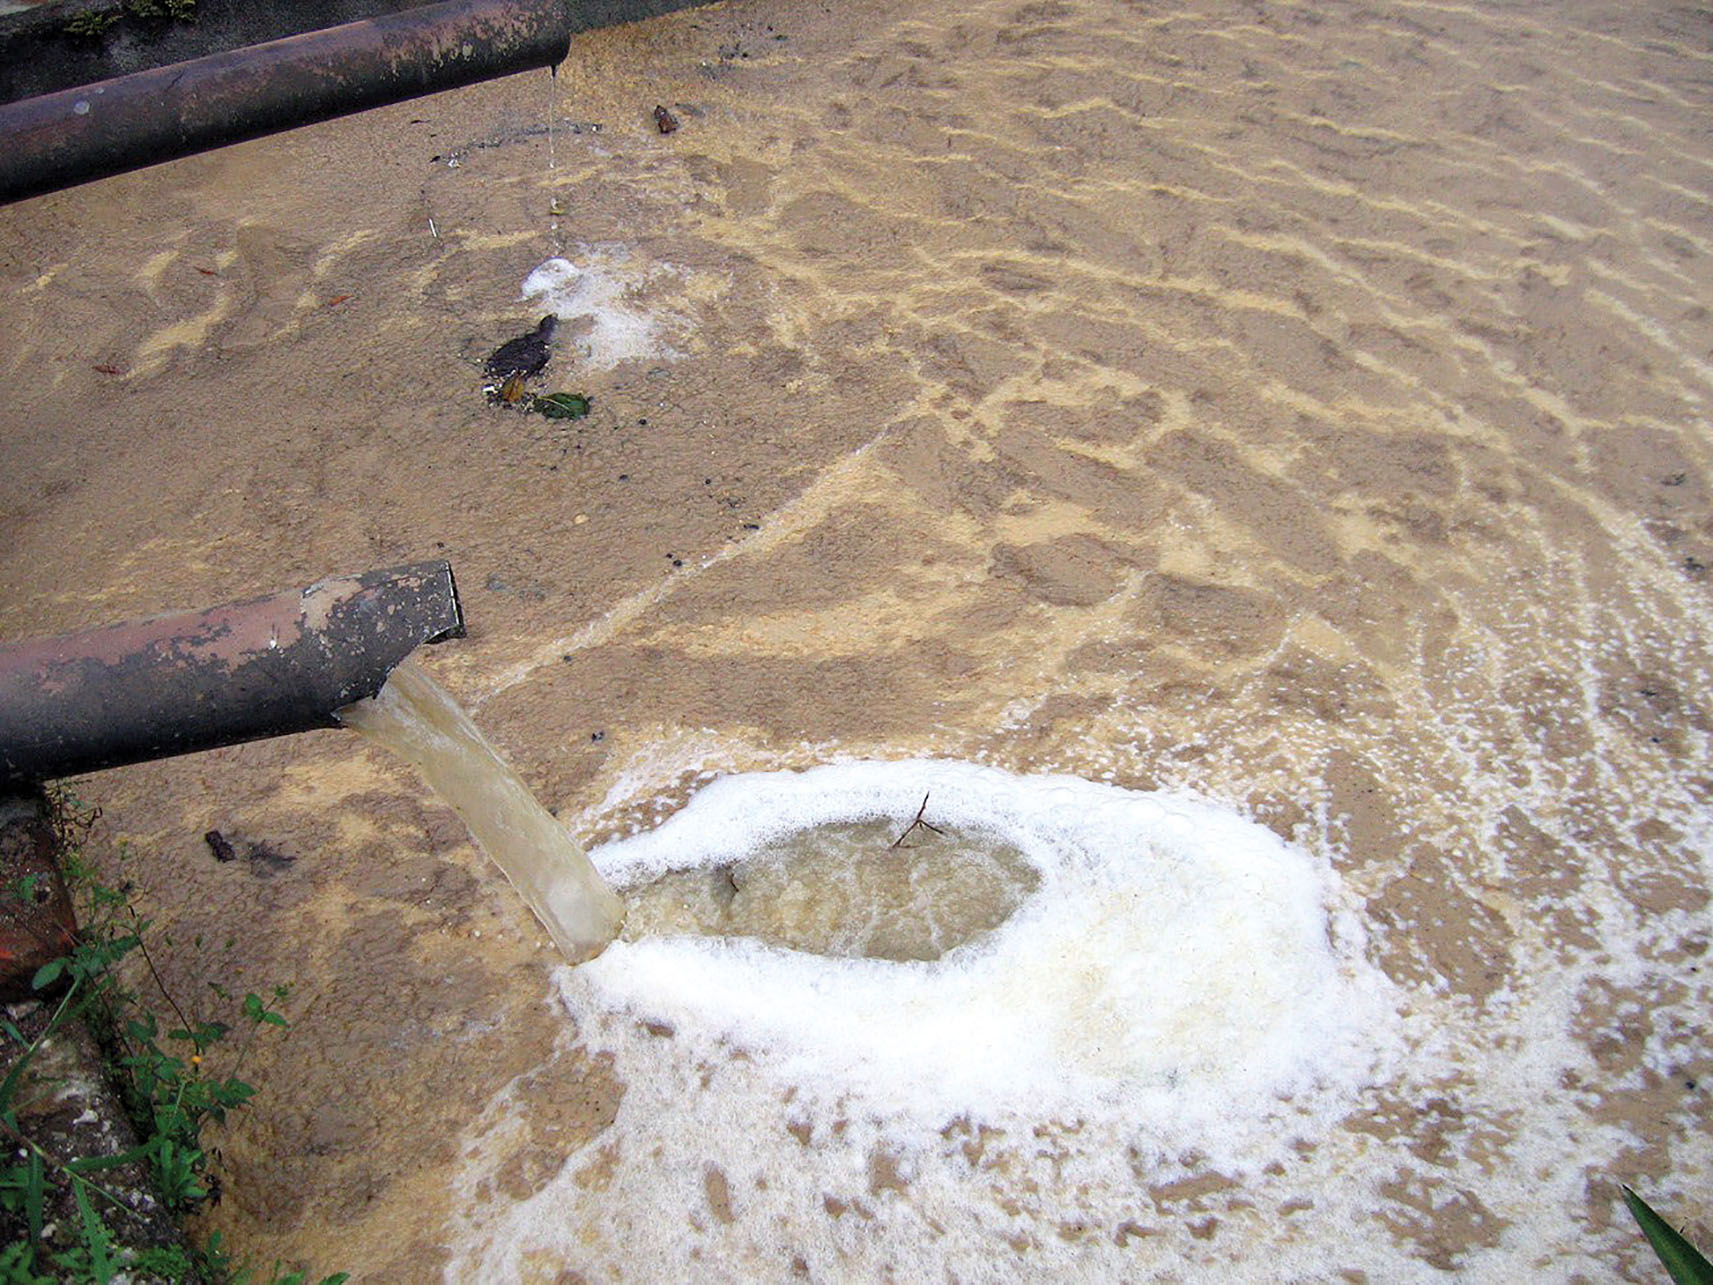 Contaminated water pours from a pipe into a brown, foaming pool in Nicaragua. (Photo by Ben Garland.)